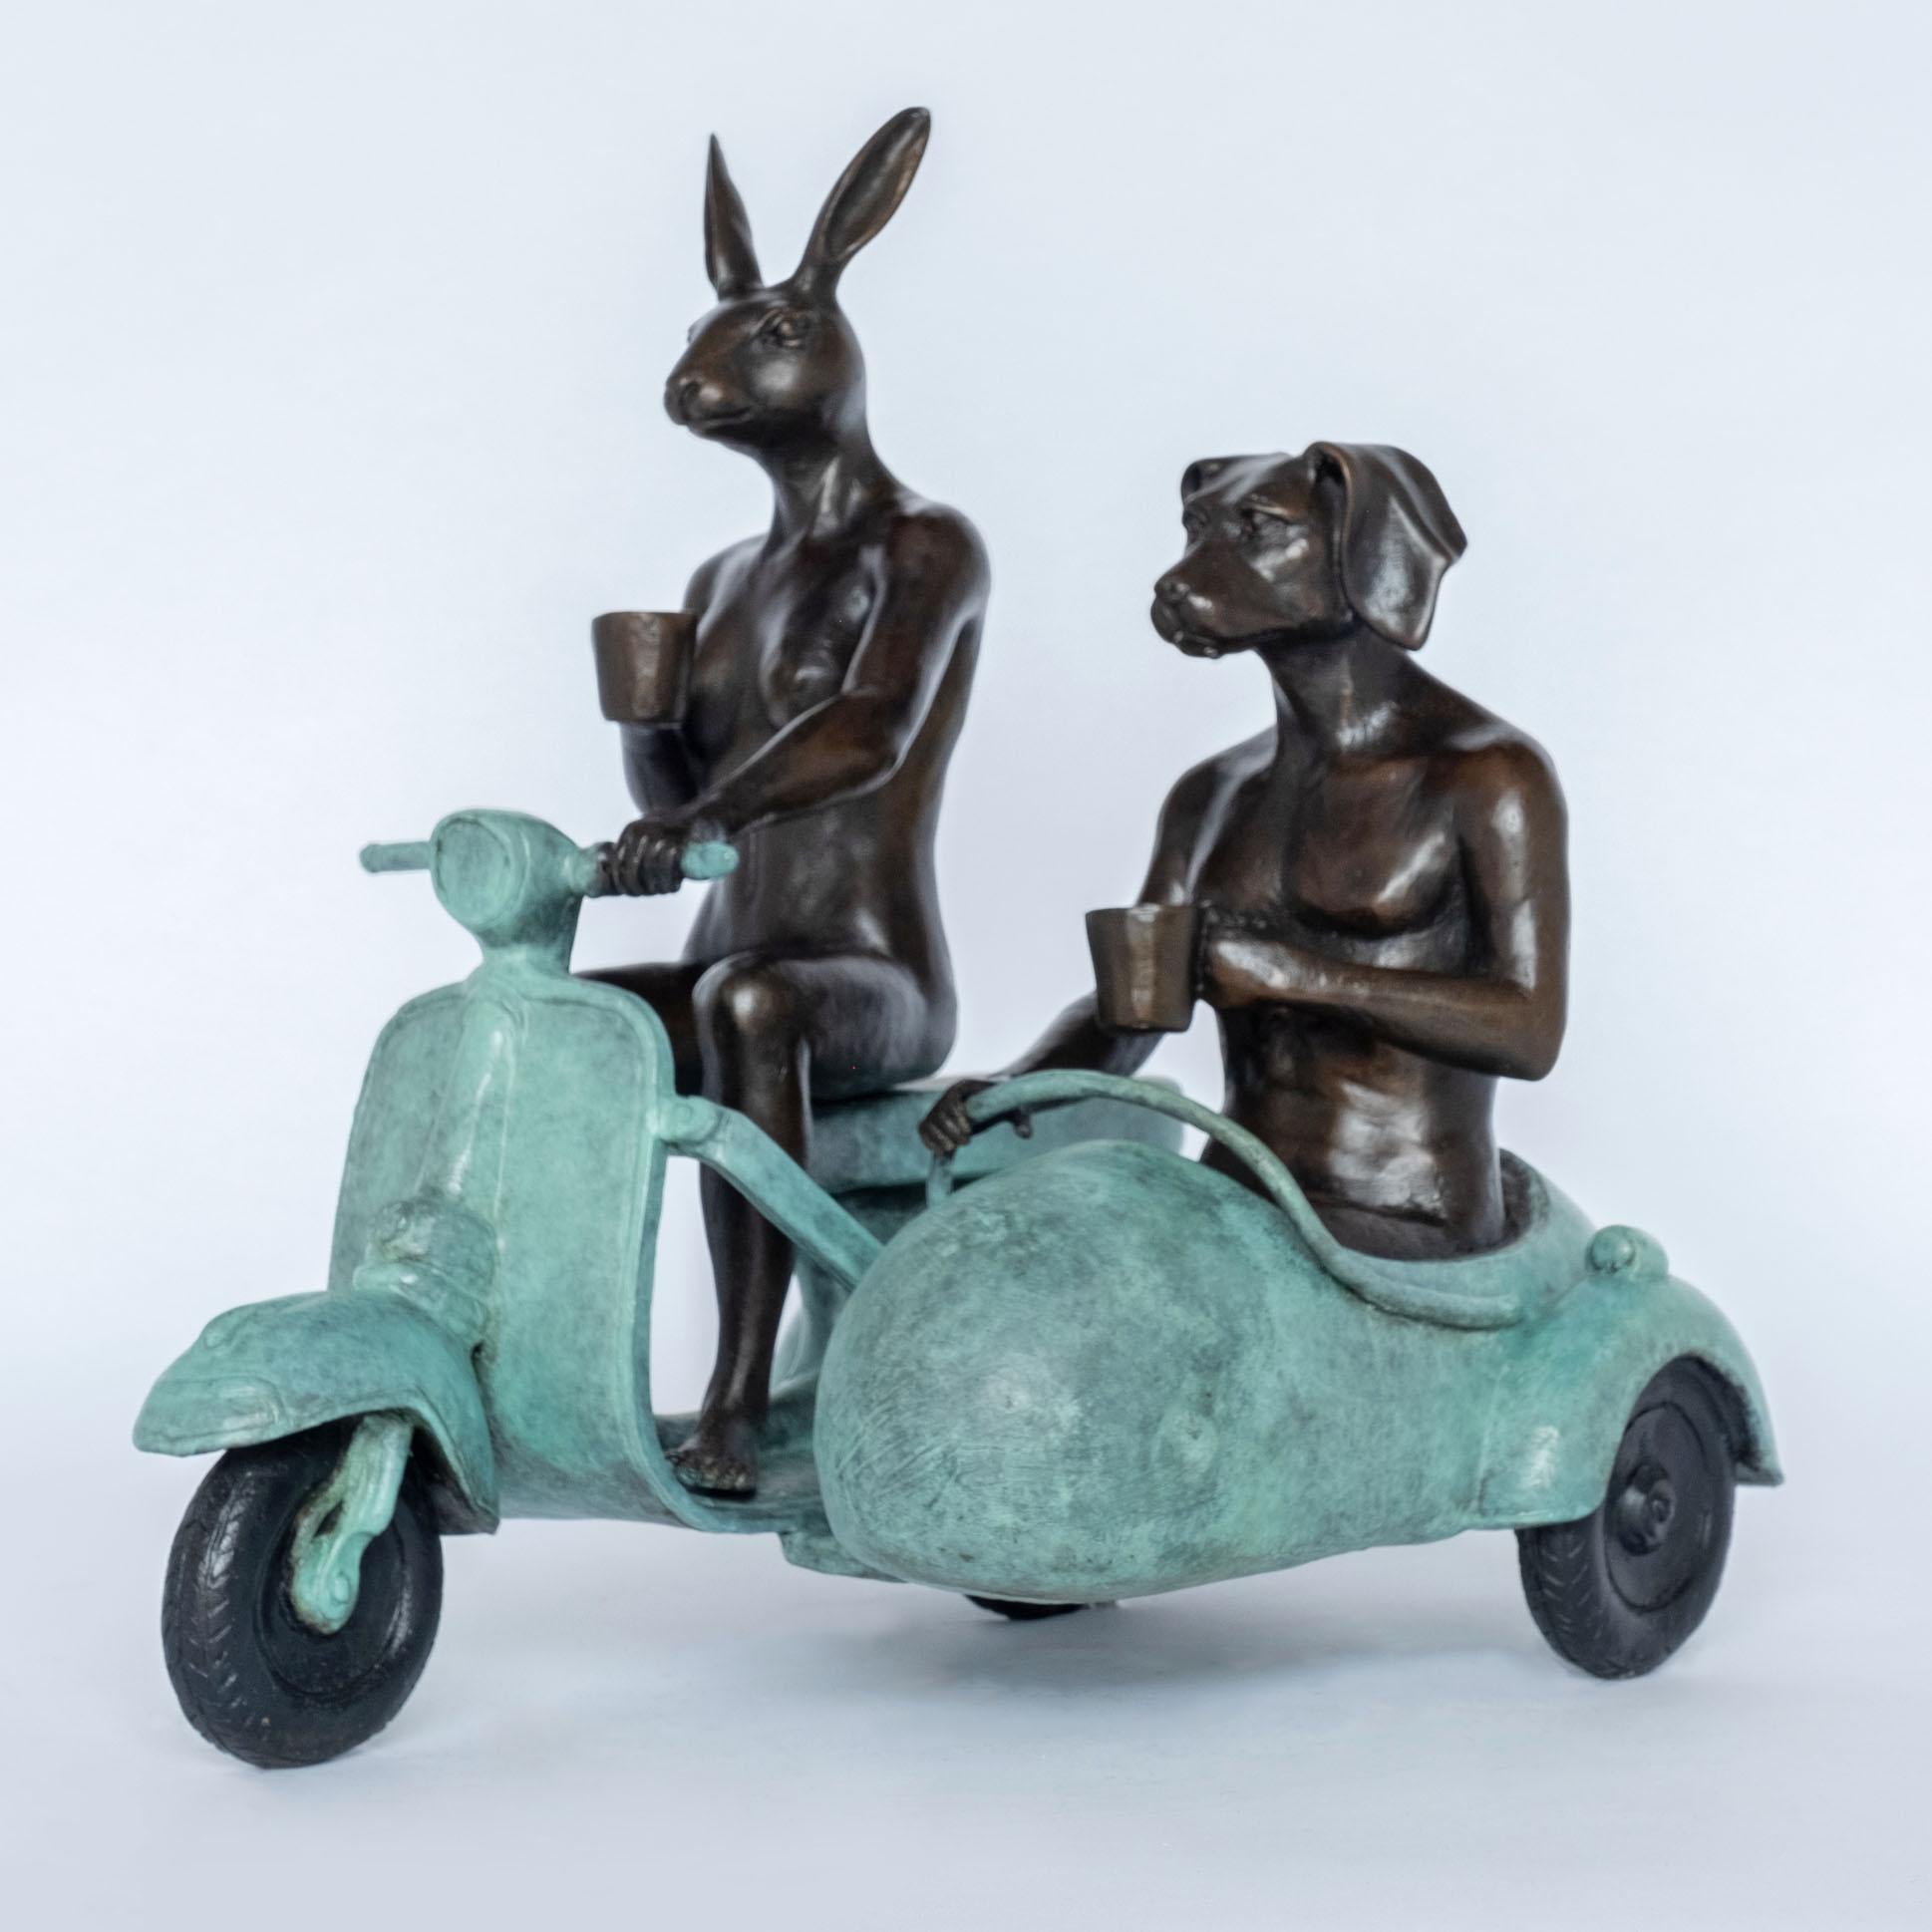 Gillie and Marc Schattner Figurative Sculpture - 'They were always side by side' by Gillie & Marc, bronze sculpture, patina